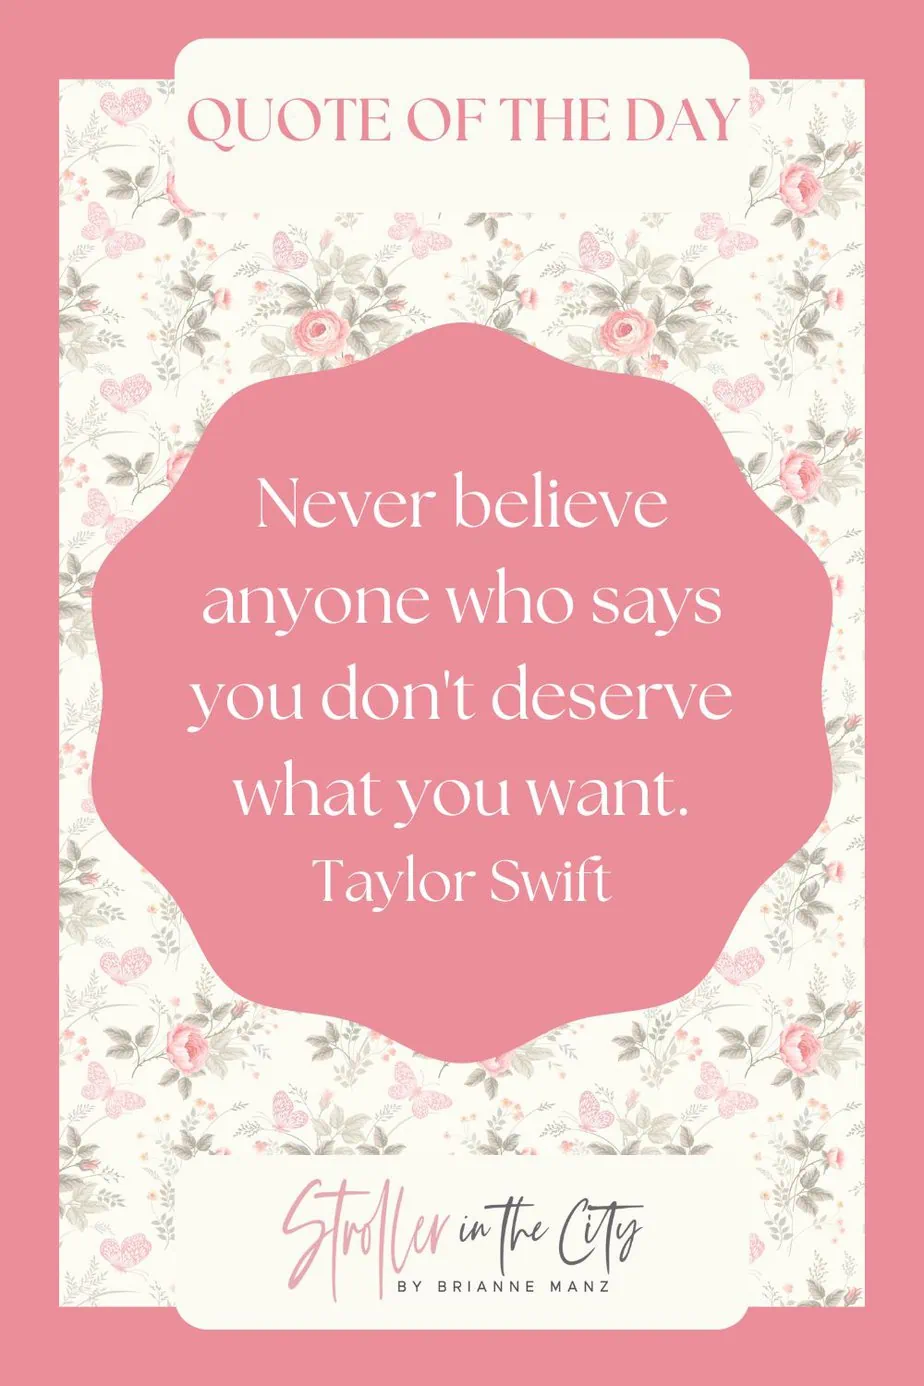 Taylor swift quote text:/ Never believe anyone who says you don't deserve what you want